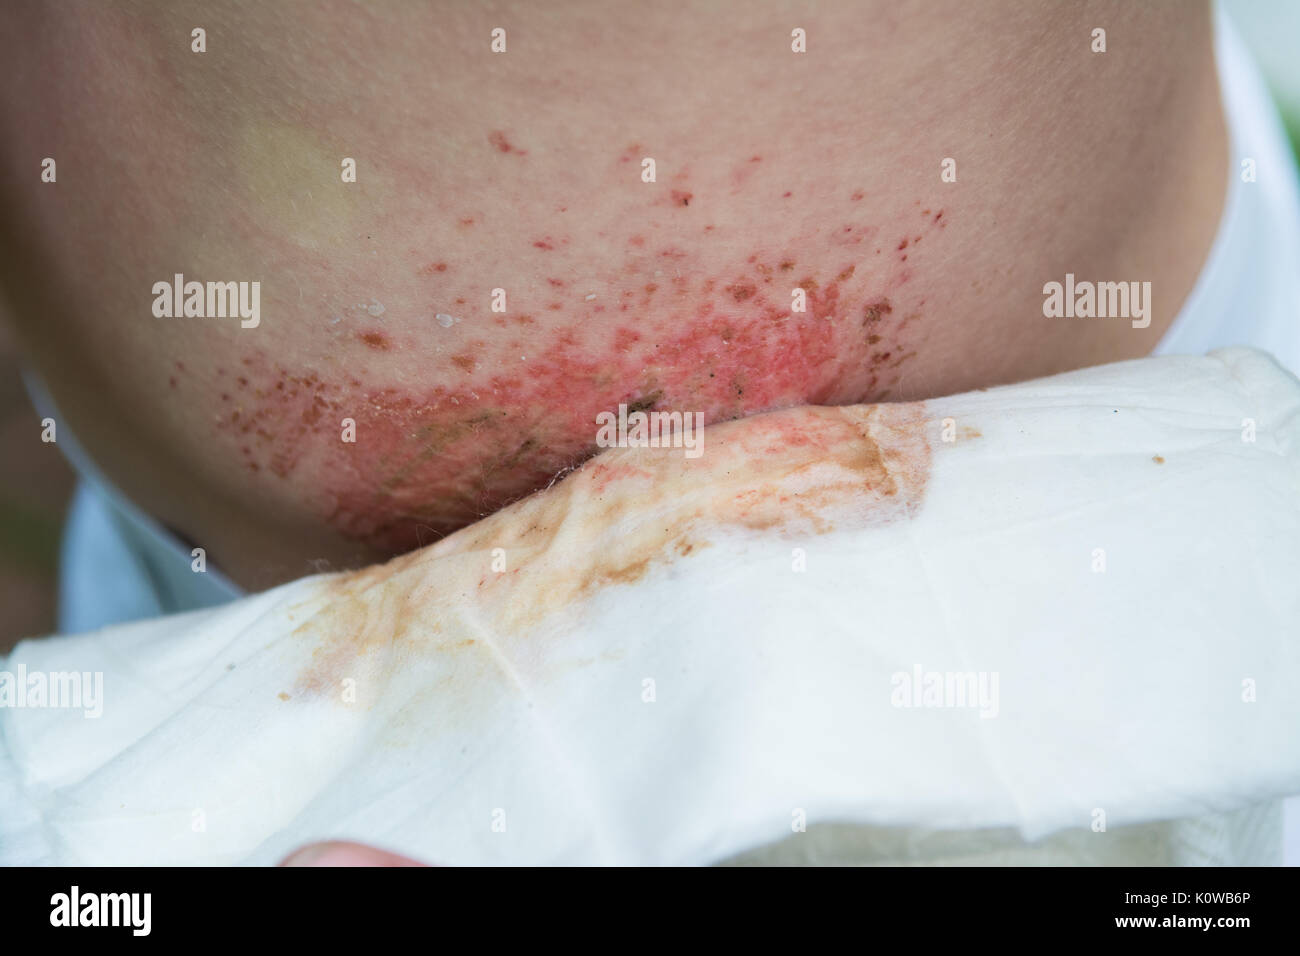 removing dressing from wound graze on side of body - downhill mountain biking injury to young man Stock Photo